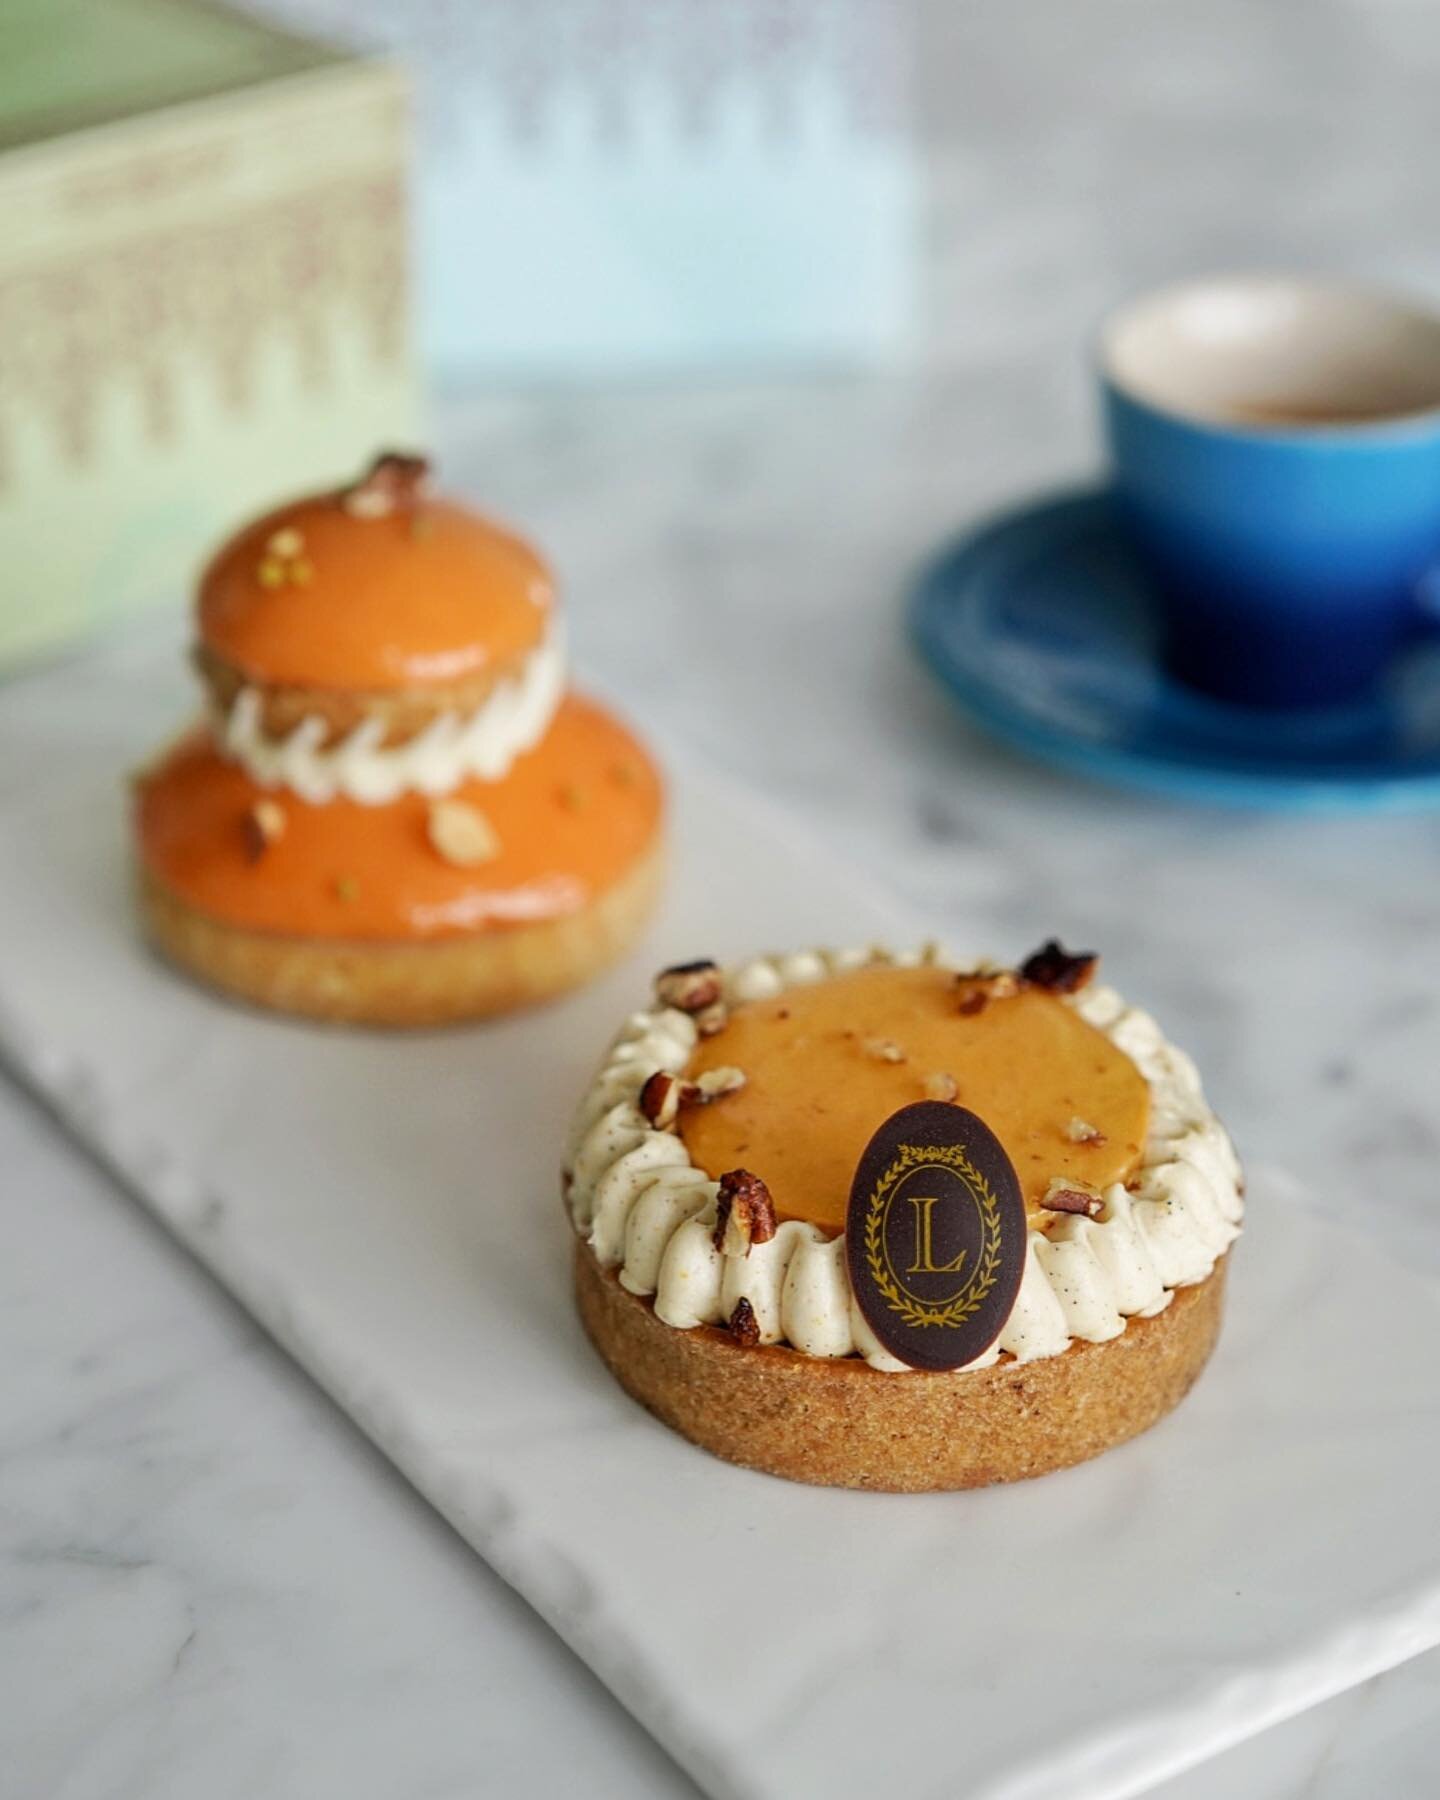 AREN&rsquo;T THEY CUTE? 🎃🍂 i just picked up all the new fall-themed goodies from @ladureecanada to help me accept that it&rsquo;s officially october

1️⃣ pumpkin tart (ft. a sweet and buttery tartlet with pumpkin compote, topped with pumpkin créme